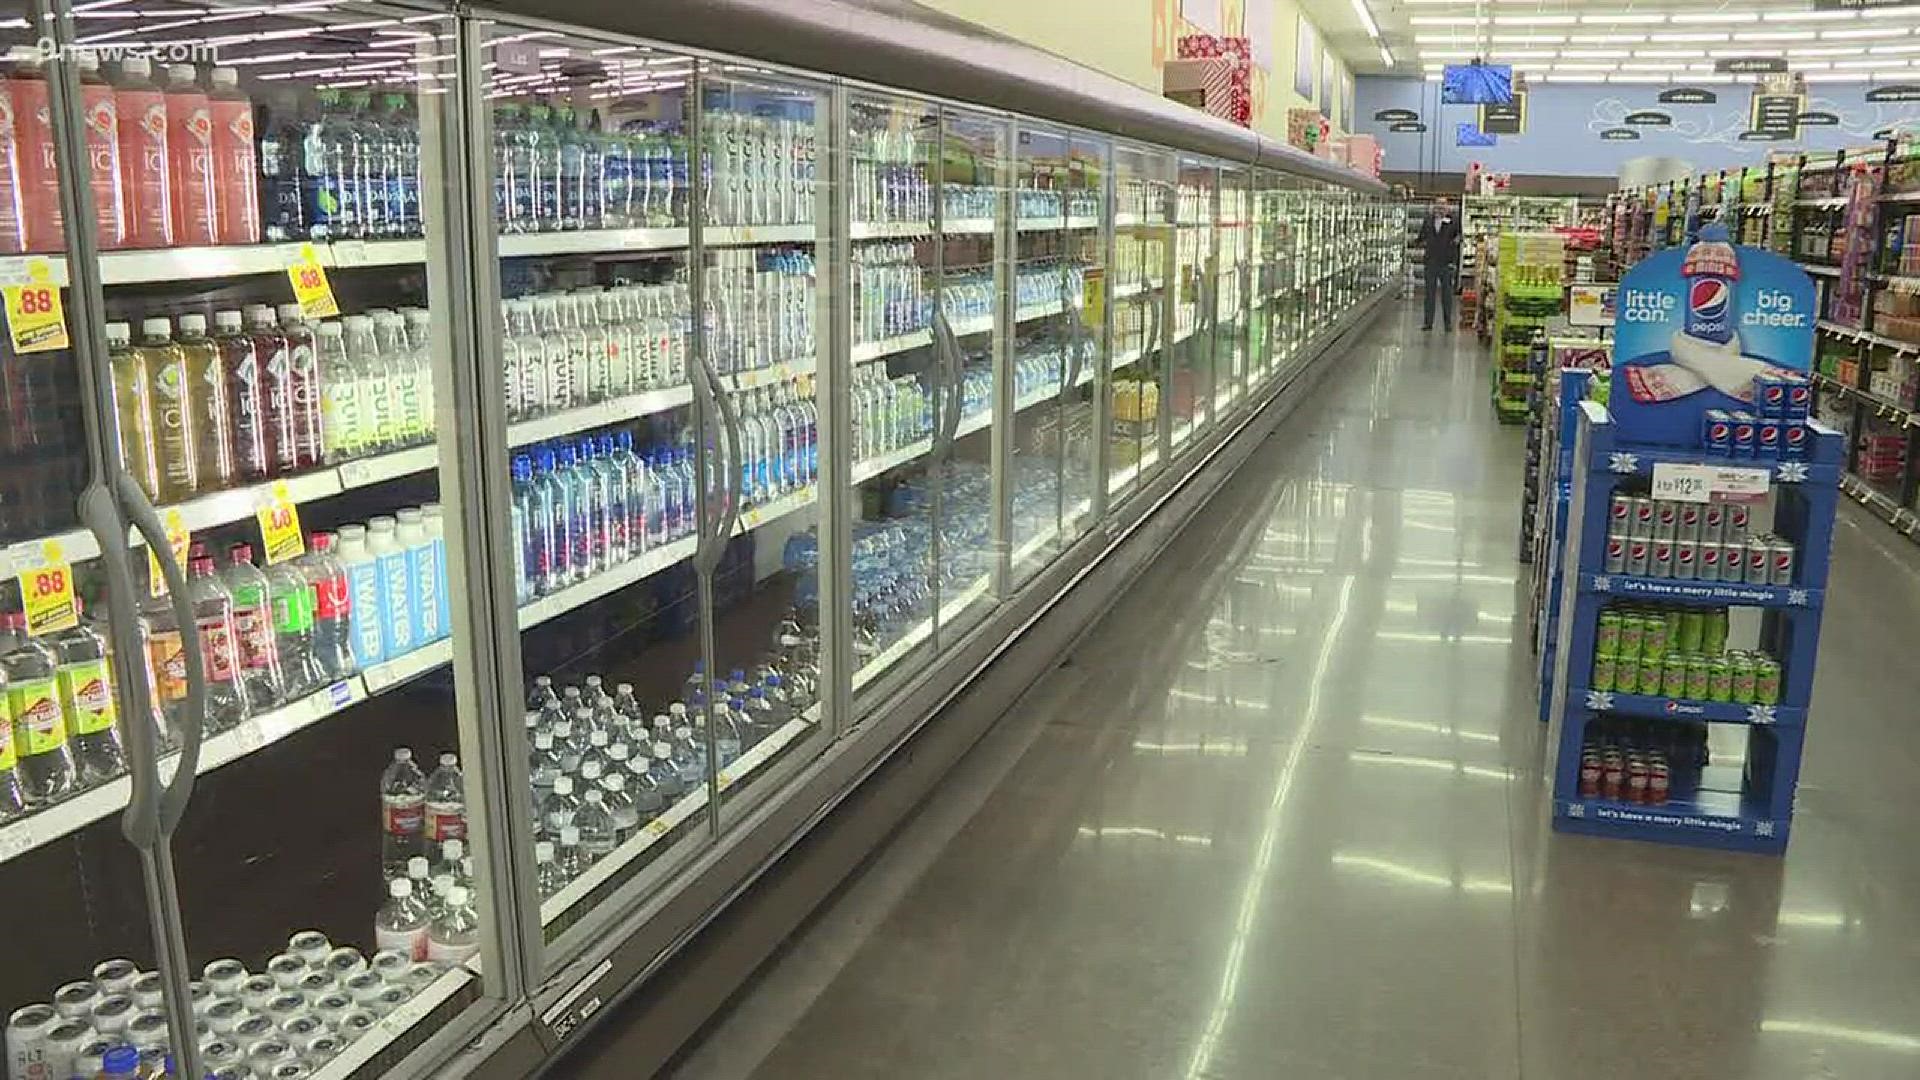 Liquor store shows 'soft' sales after grocery store change